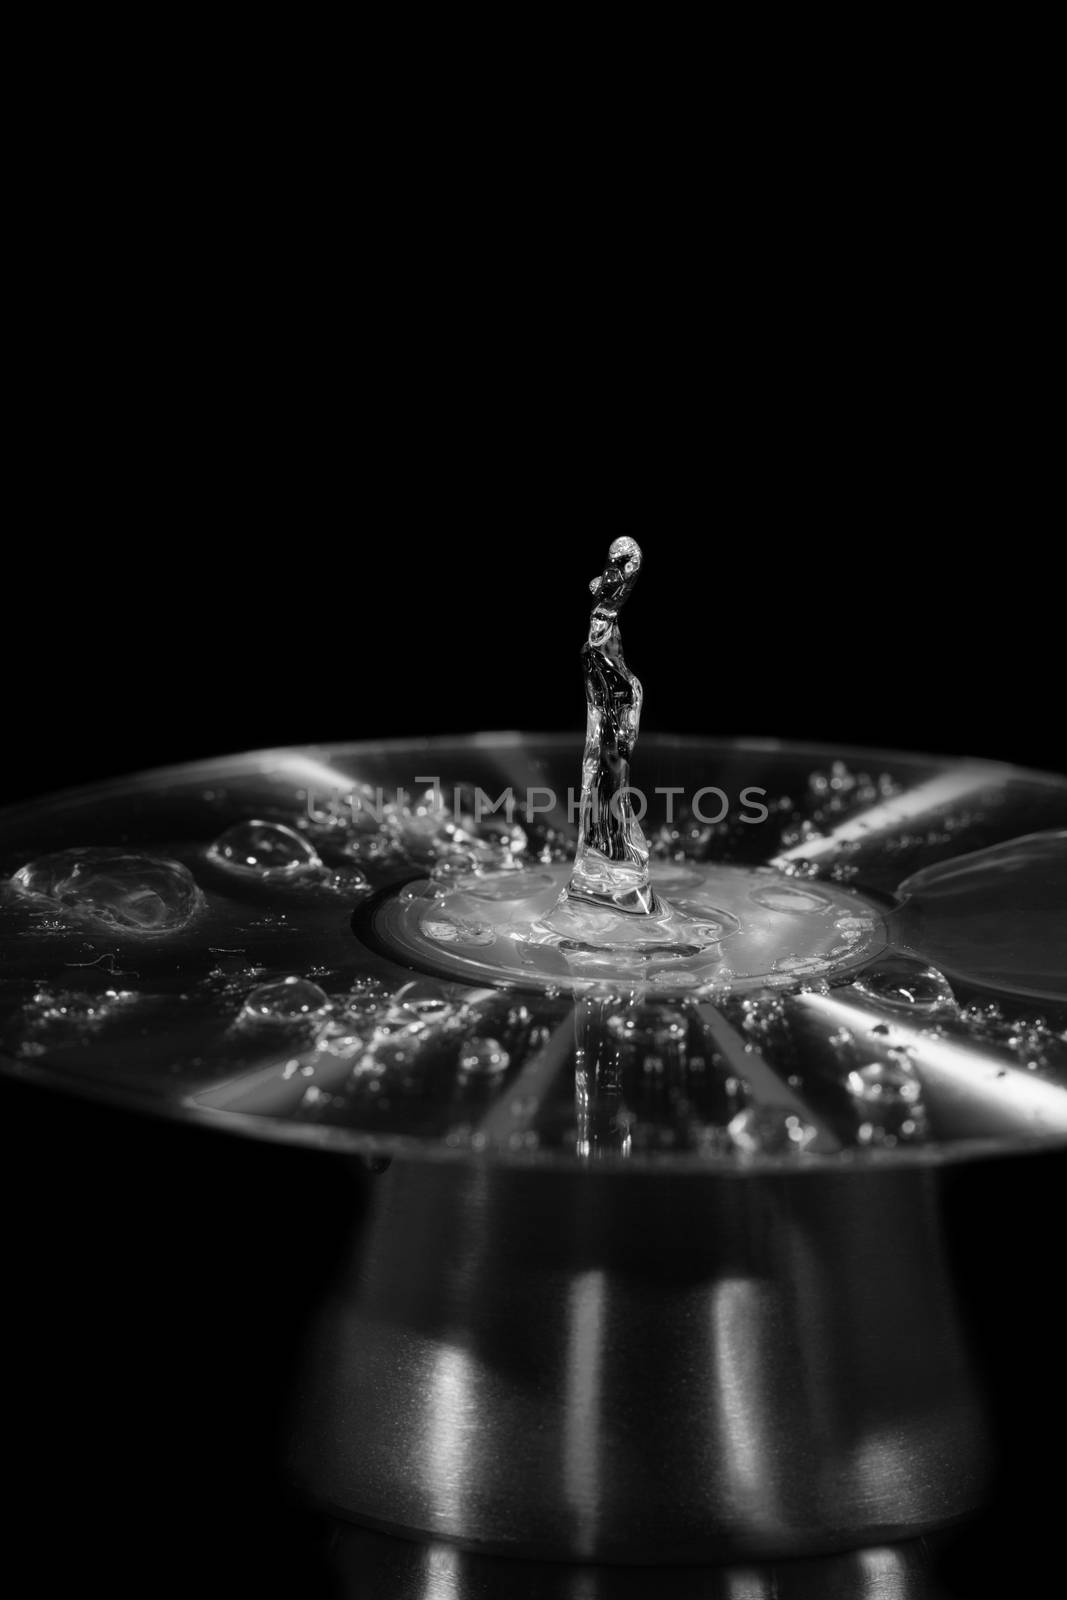 Drops of water splashed onto a cd form the figure of a lady dancing, monotone flash photography